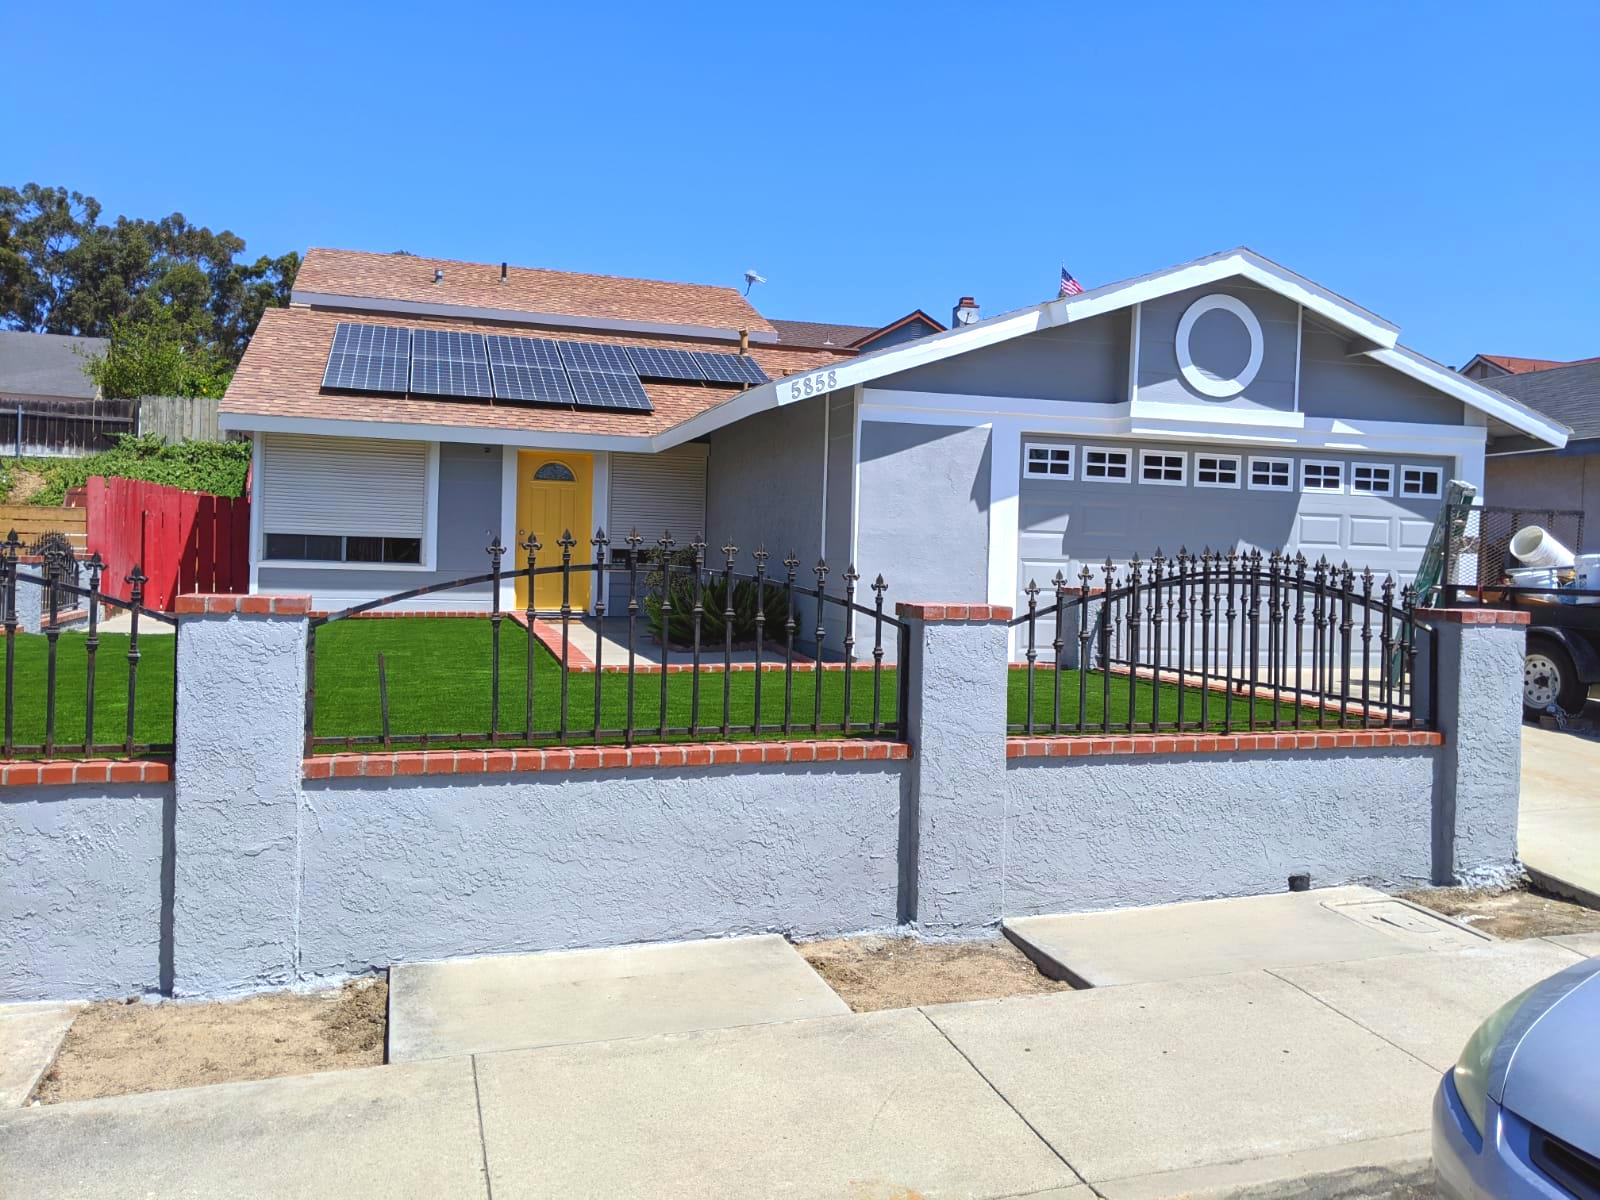 House Painting in San Diego 92114